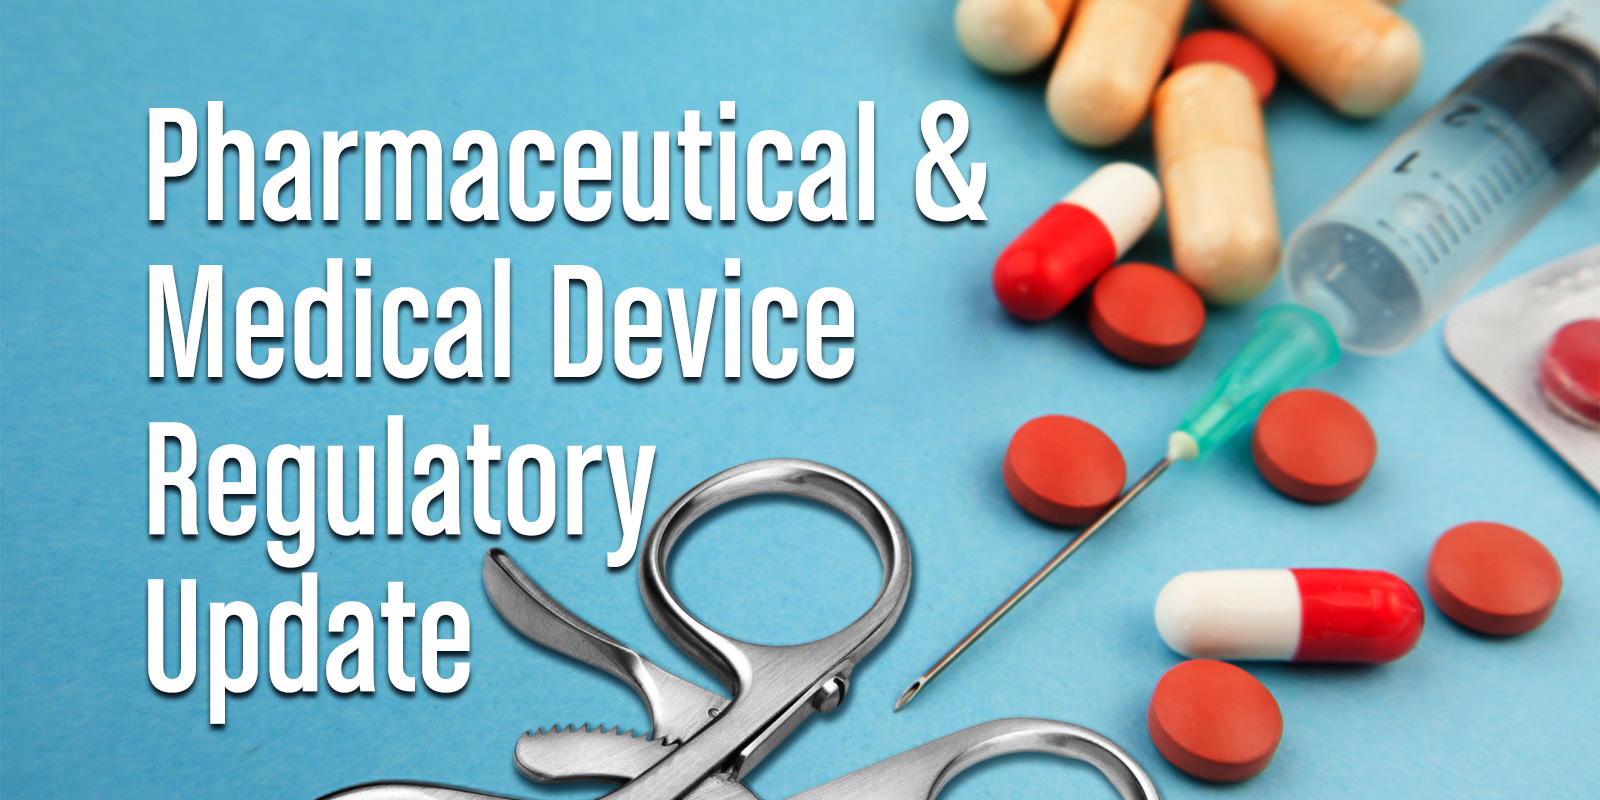 Pharmaceutical & Medical Device Update, Vol. IV, Issue III